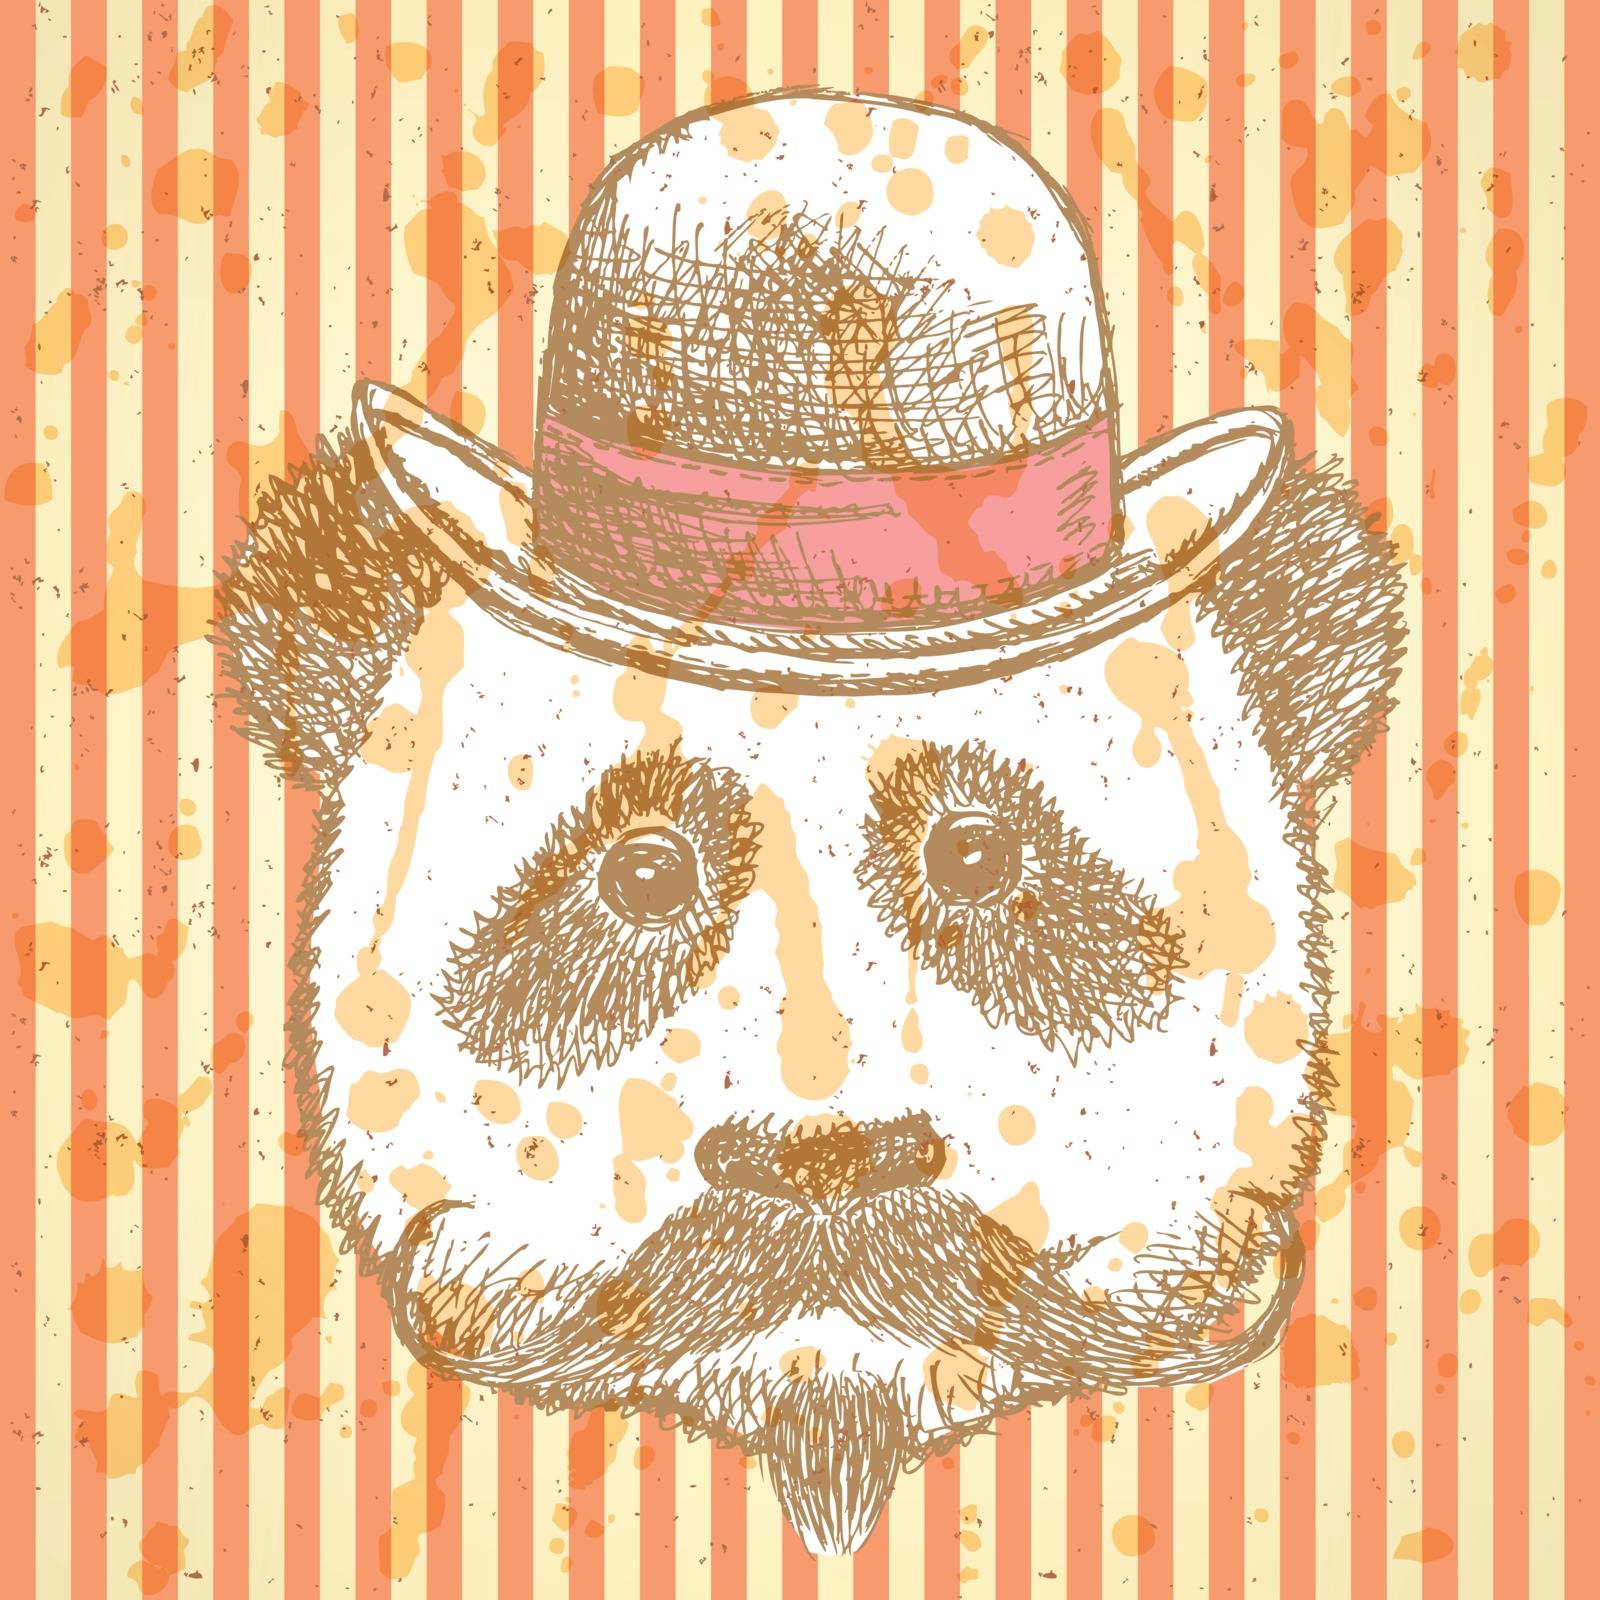 Sketch panda in hat with mustache by KaLi